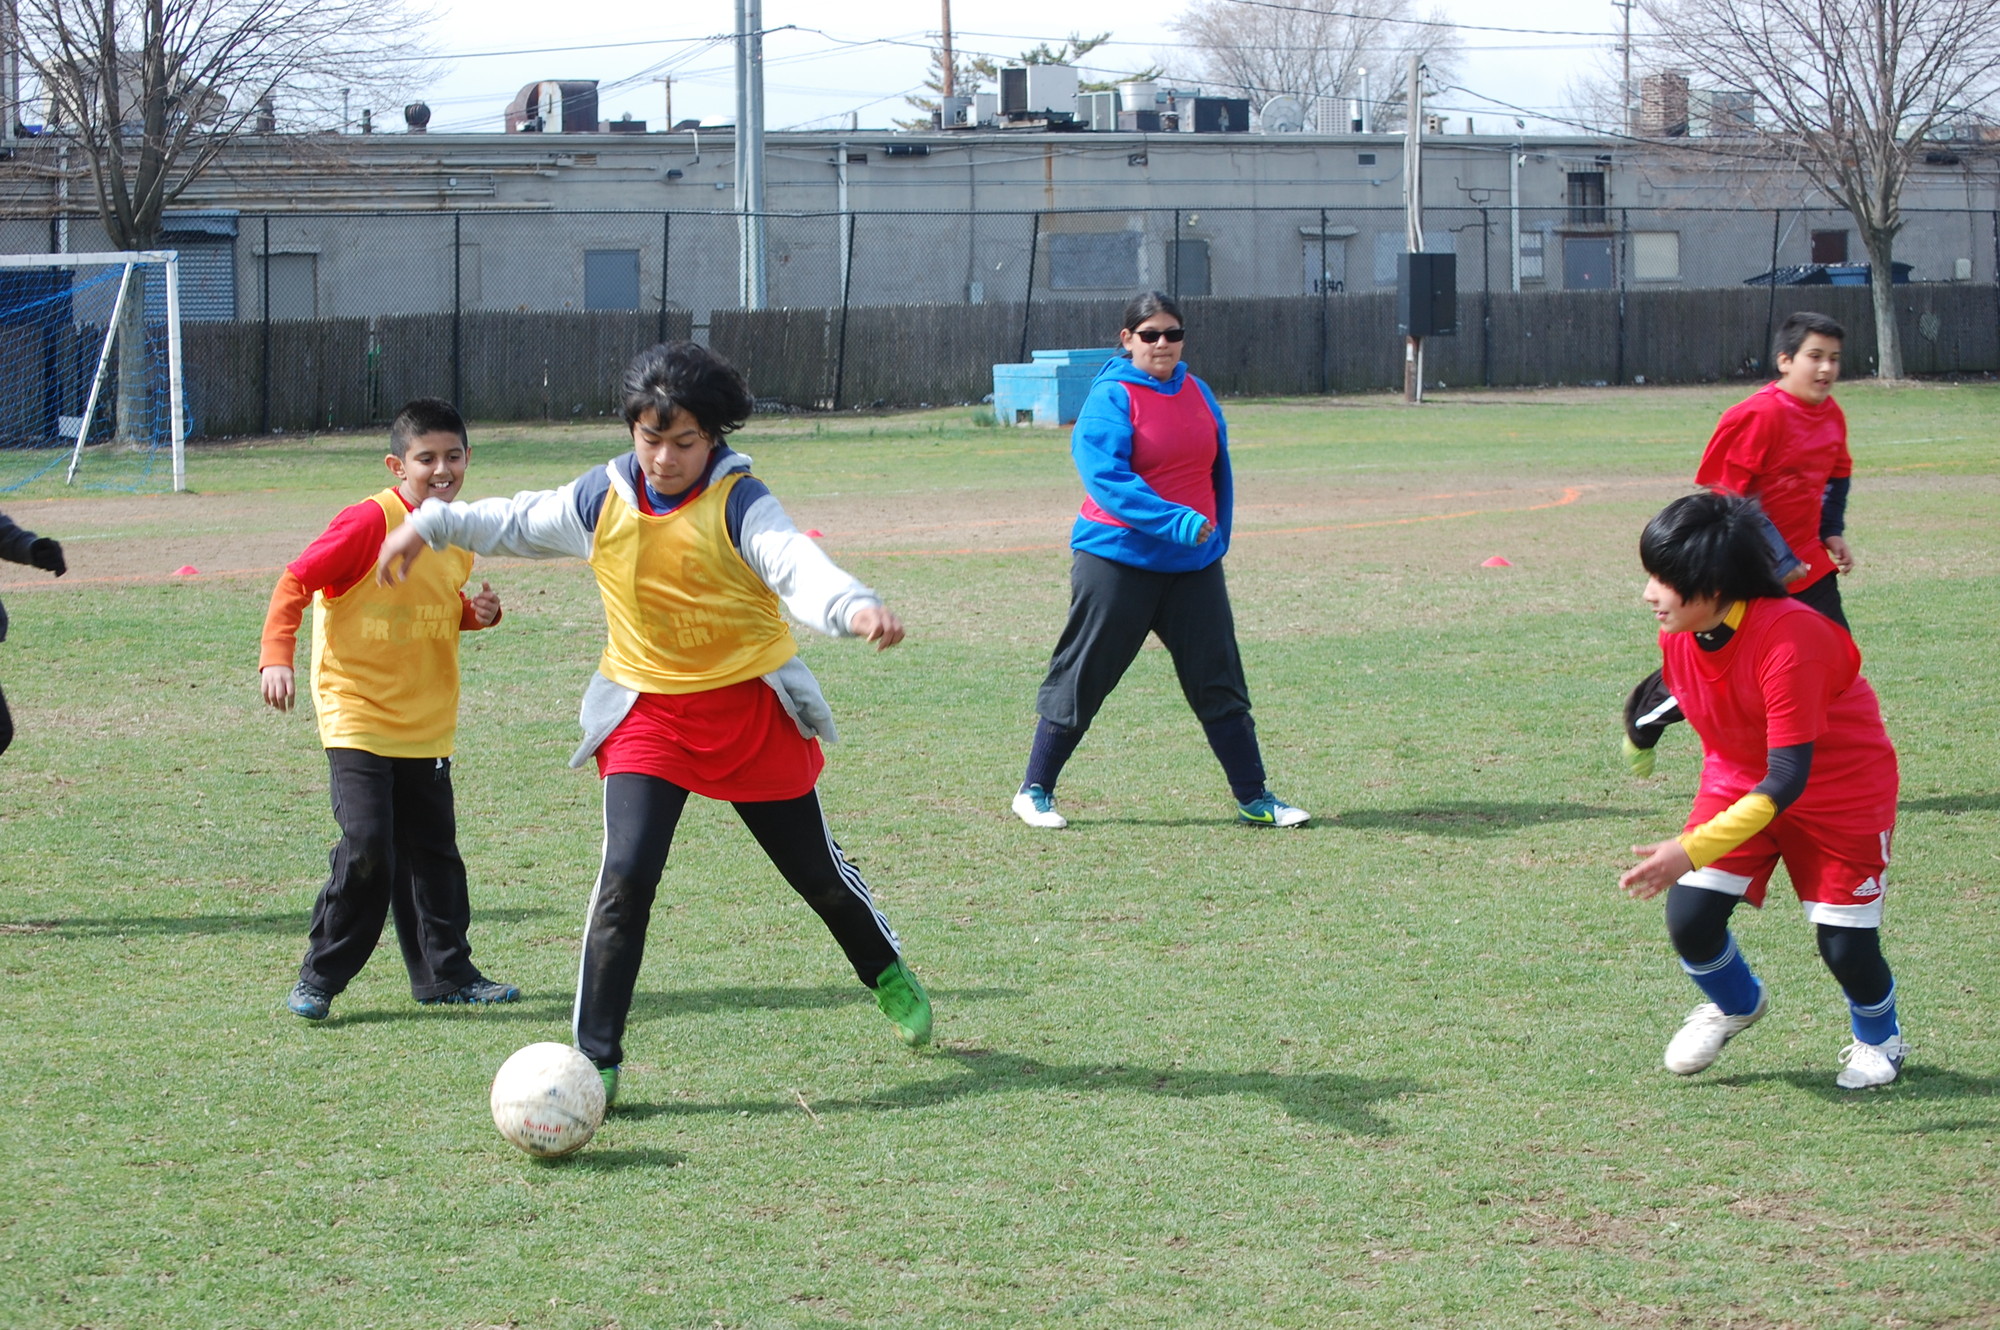 Players from the Valley Stream Soccer Club participated in a week-long skills clinic at Barrett Park from April 14-18. After learning various techniques, the players then practiced their new-found skills in games.